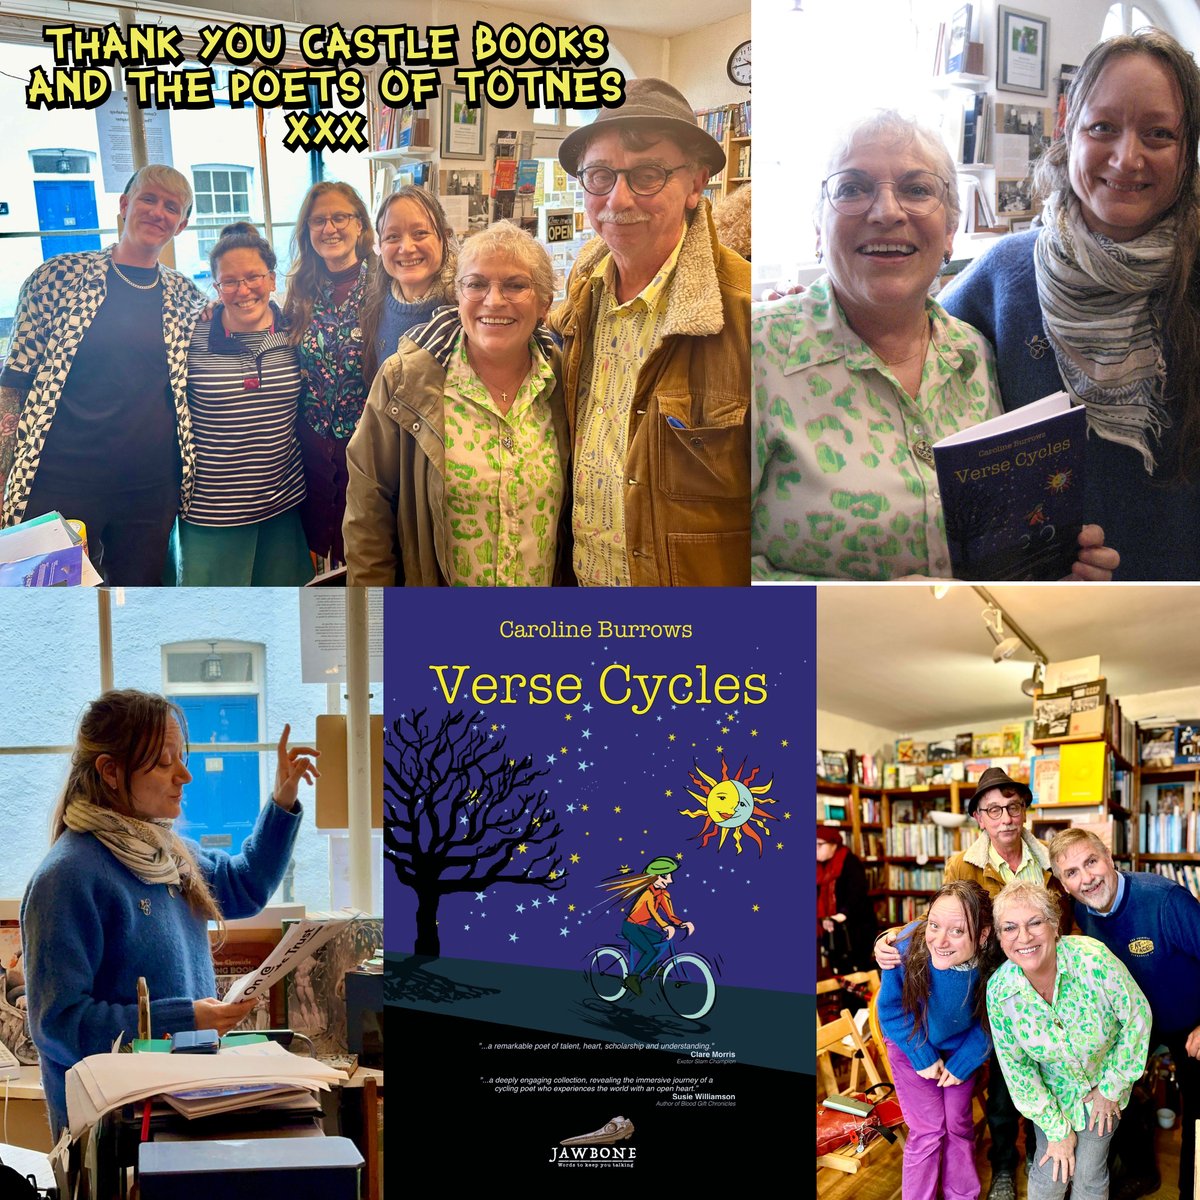 I had such a wonderful time reading poems on Sunday afternoon at #WordStir in the wee gem that is @CastleBooks in #Totnes. #poetrycommunity #poetryevent #communitybookshop #versecycles #booktour #cyclepoet